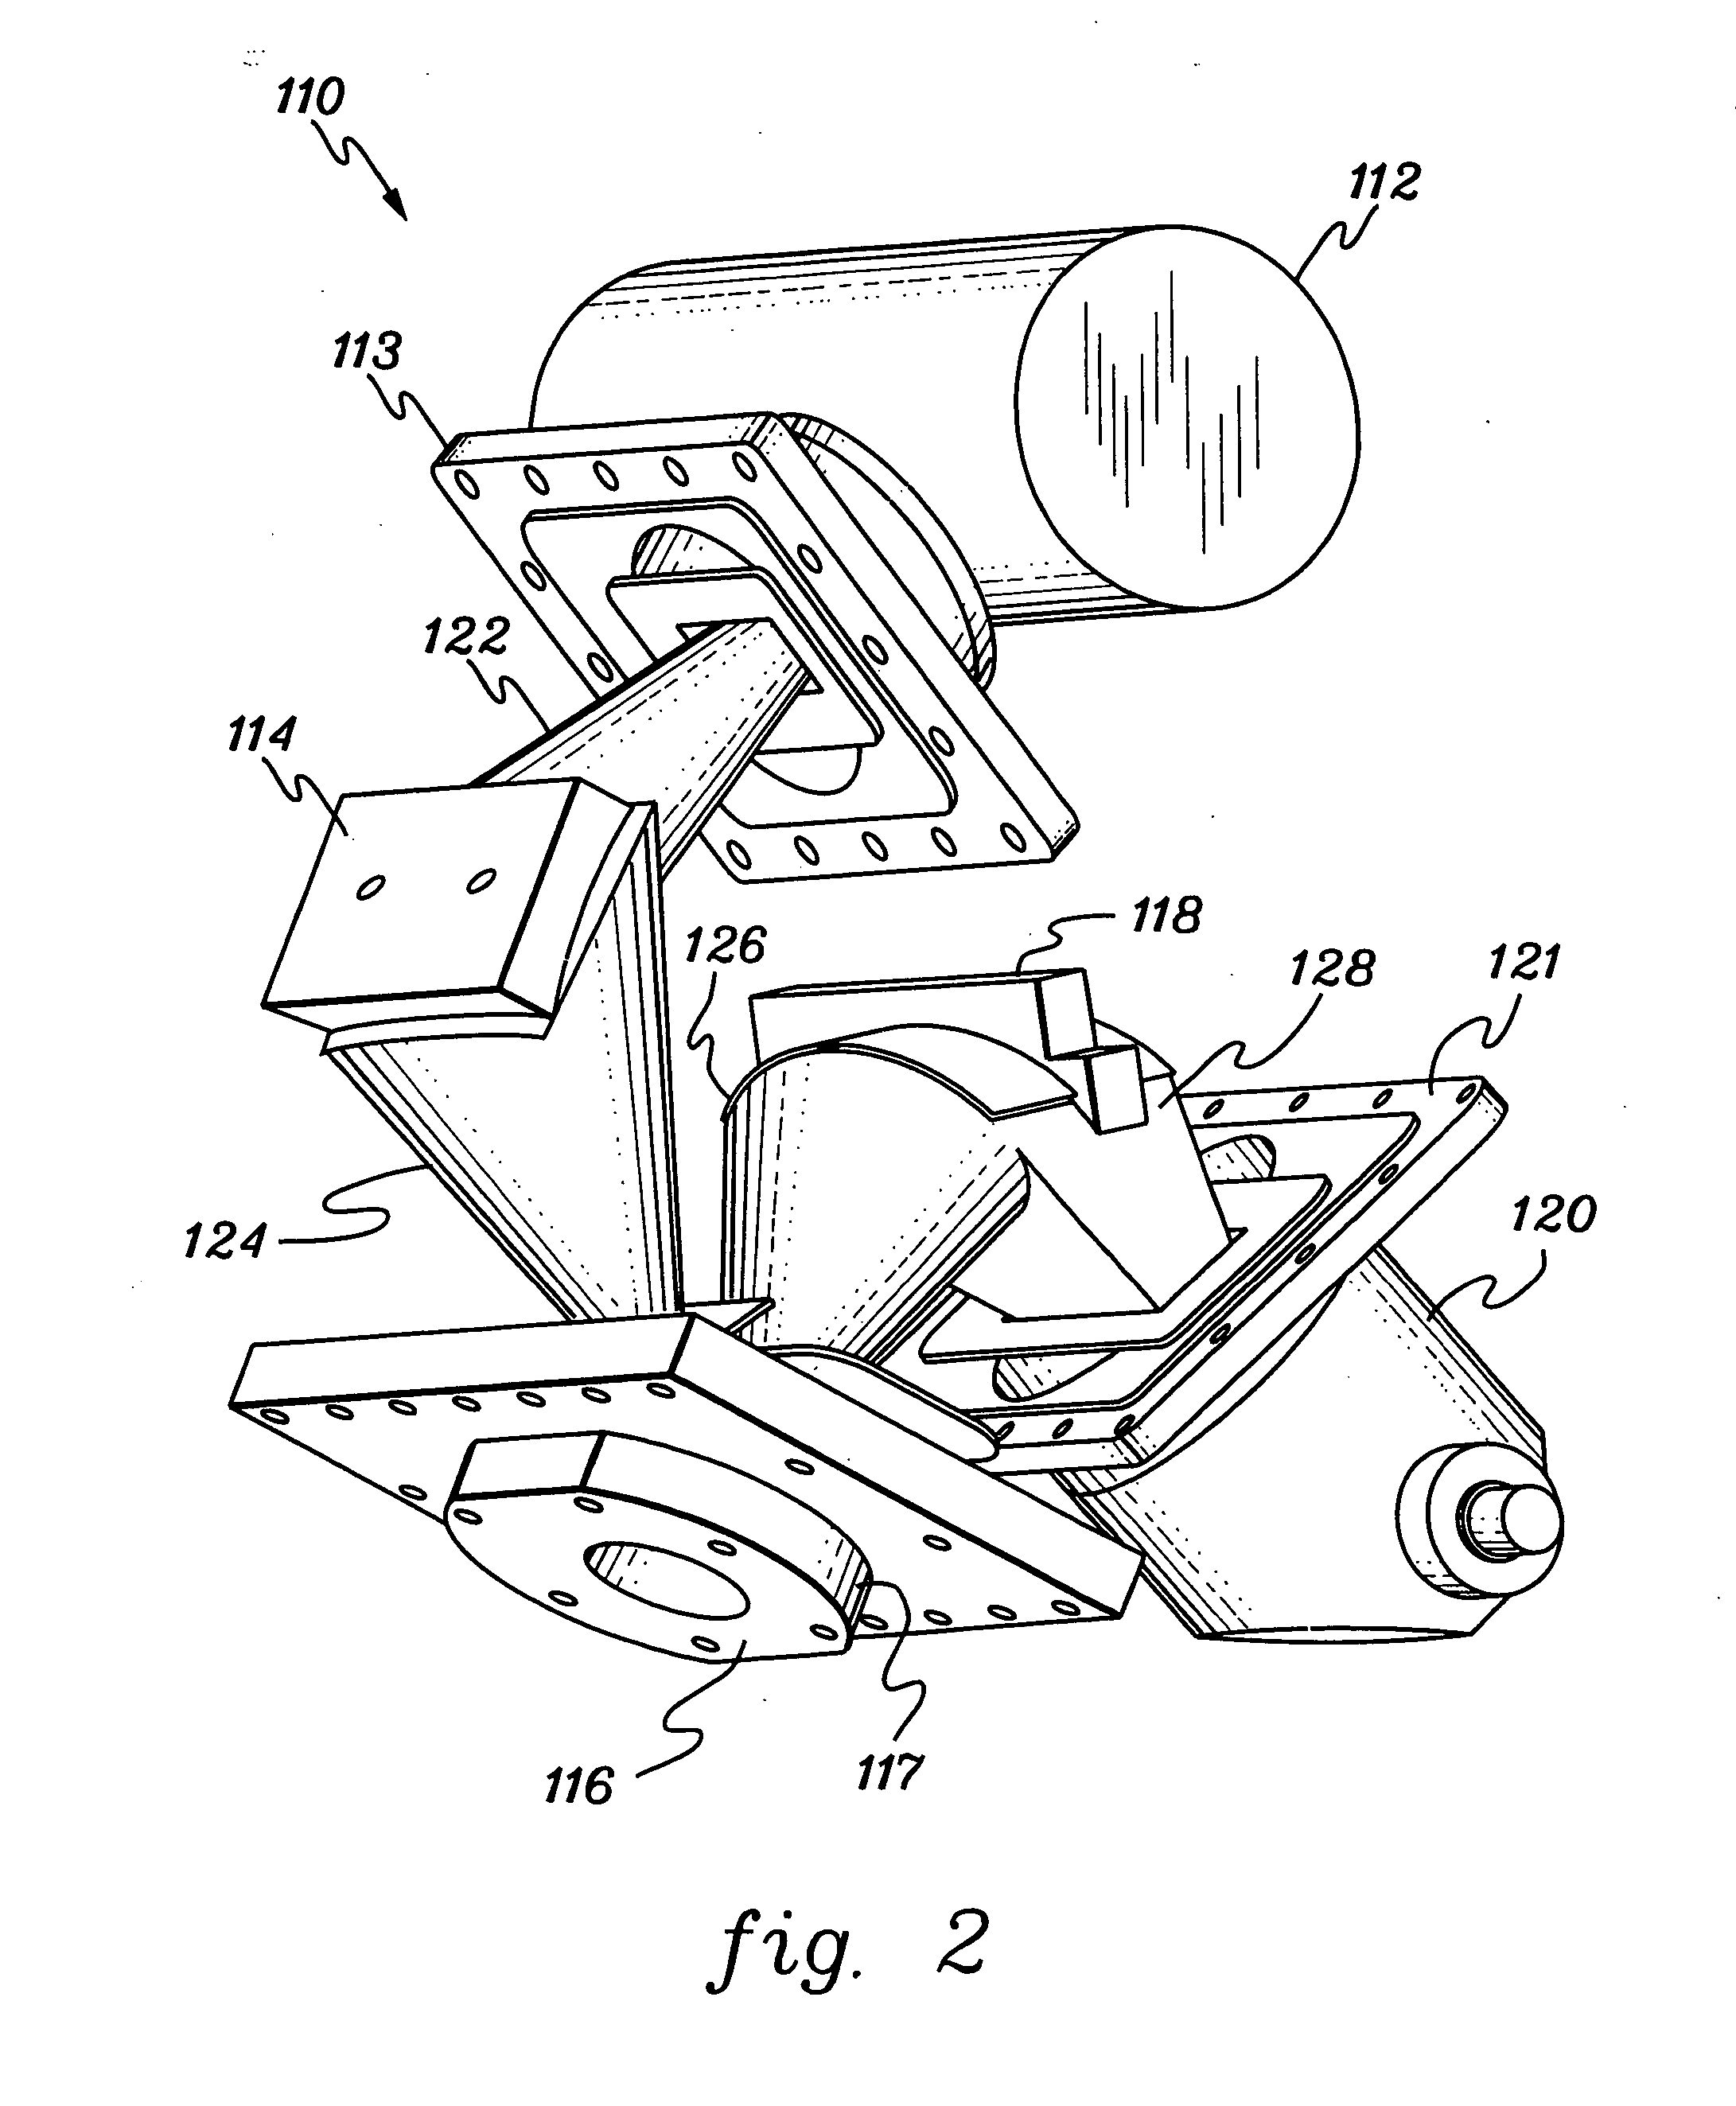 Moveable transparent barrier for x-ray analysis of a pressurized sample